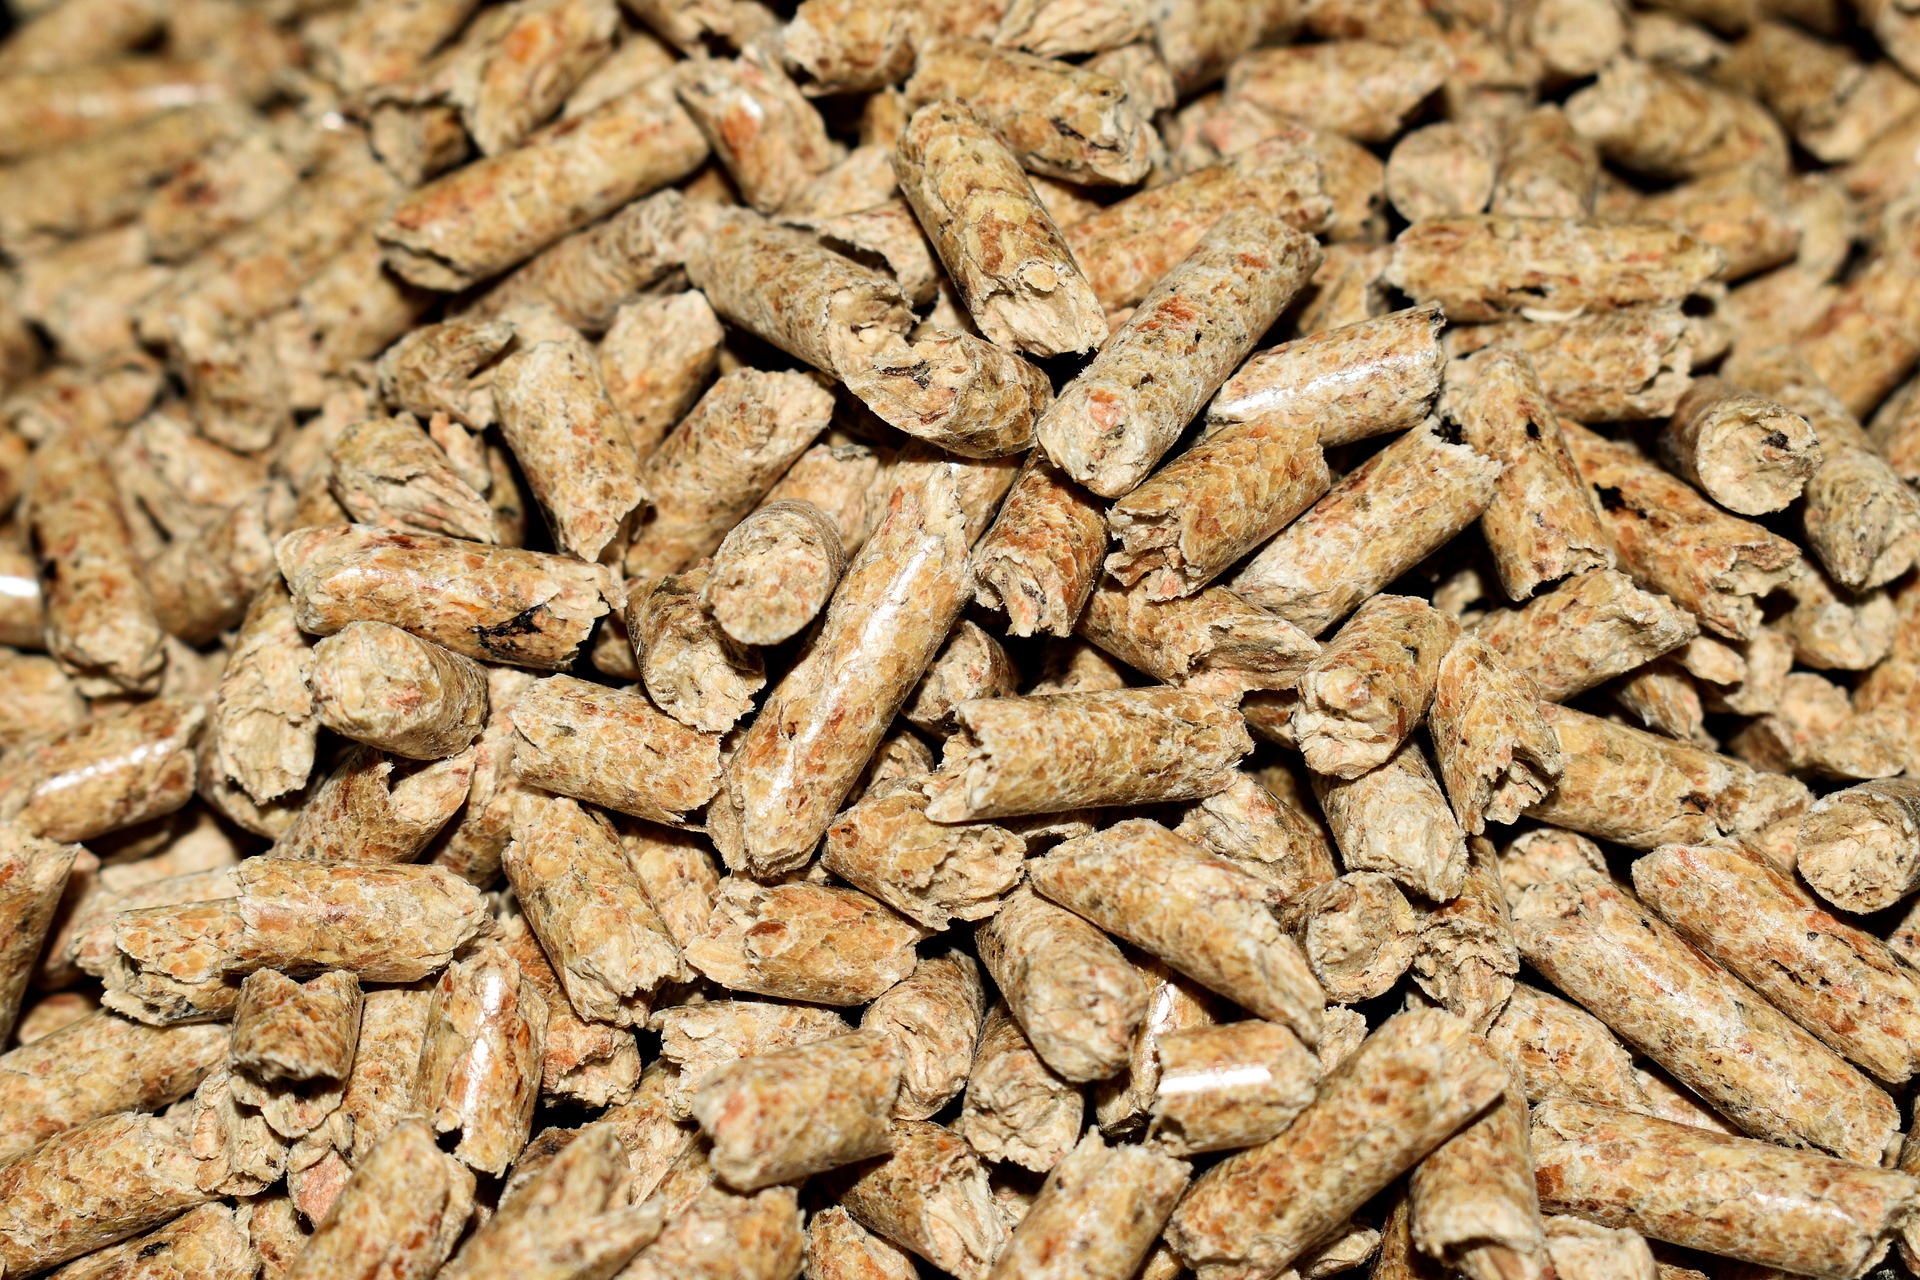 Covid-19 Outbreak: Wood Pellets Market Size, Share and Forecasts by 2027